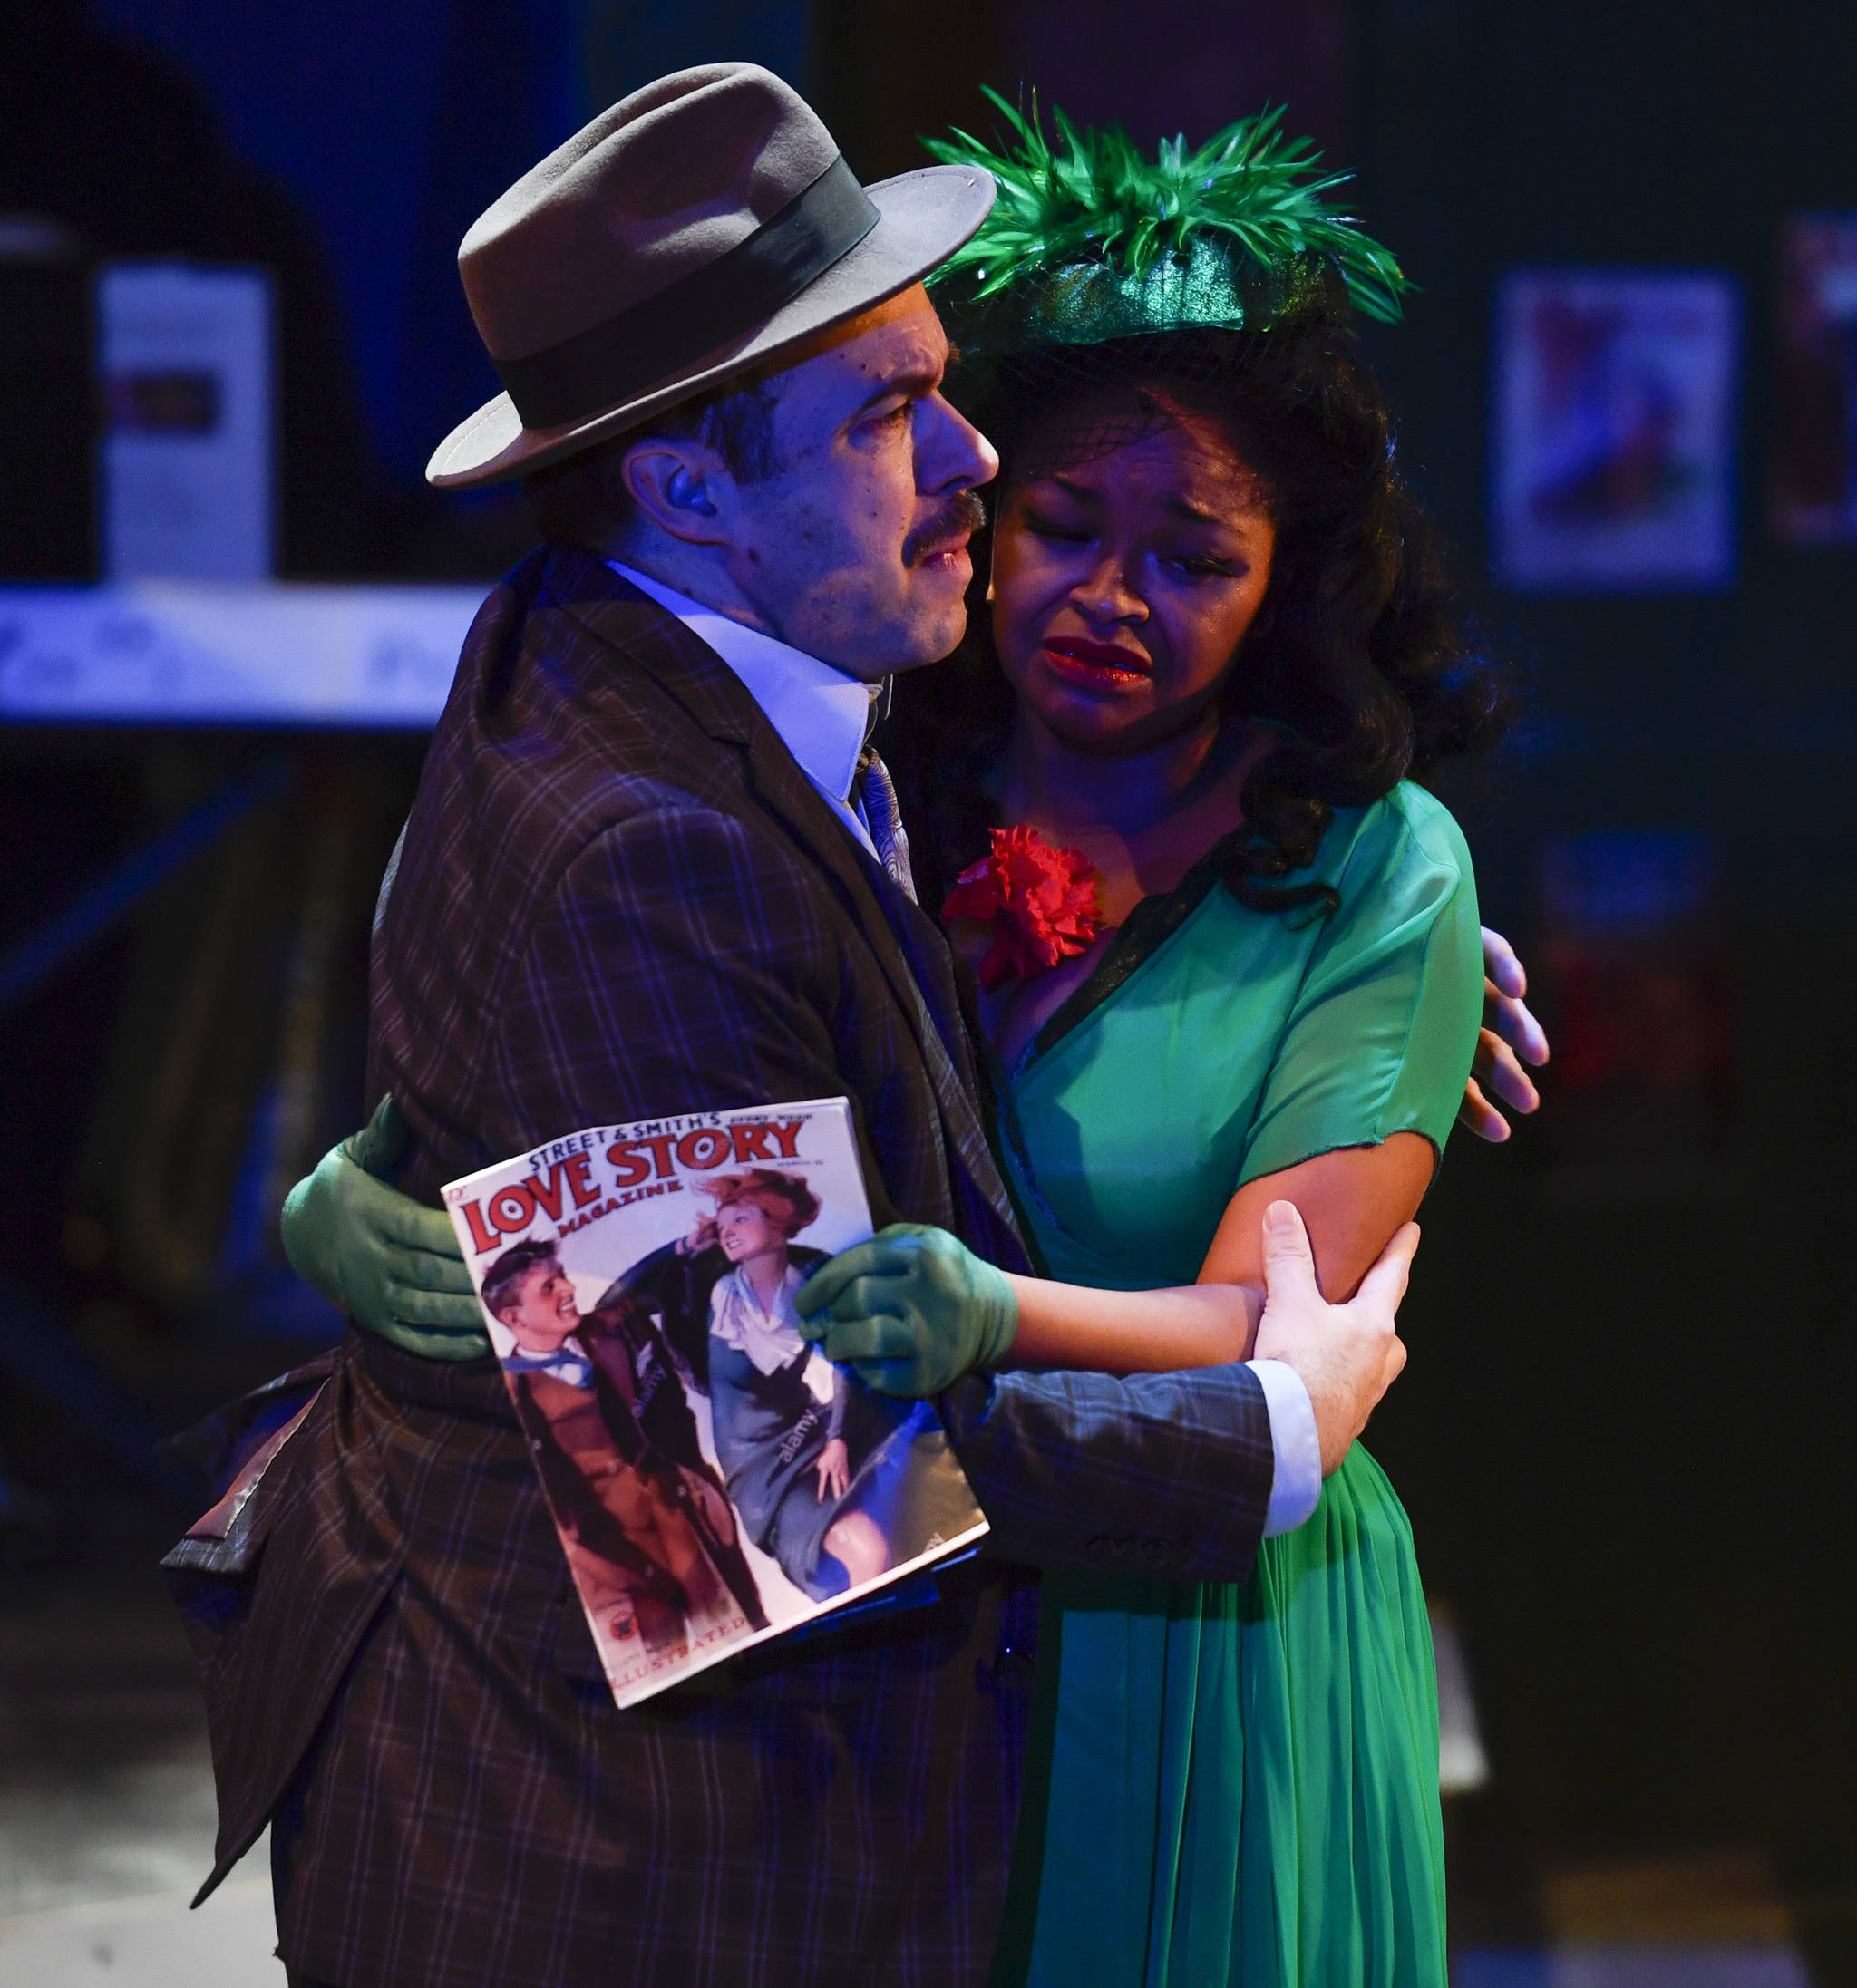 A performance of “Guys and Dolls” at Perseverance Theatre on Thursday, March 14, 2019. (Michael Penn | Juneau Empire)